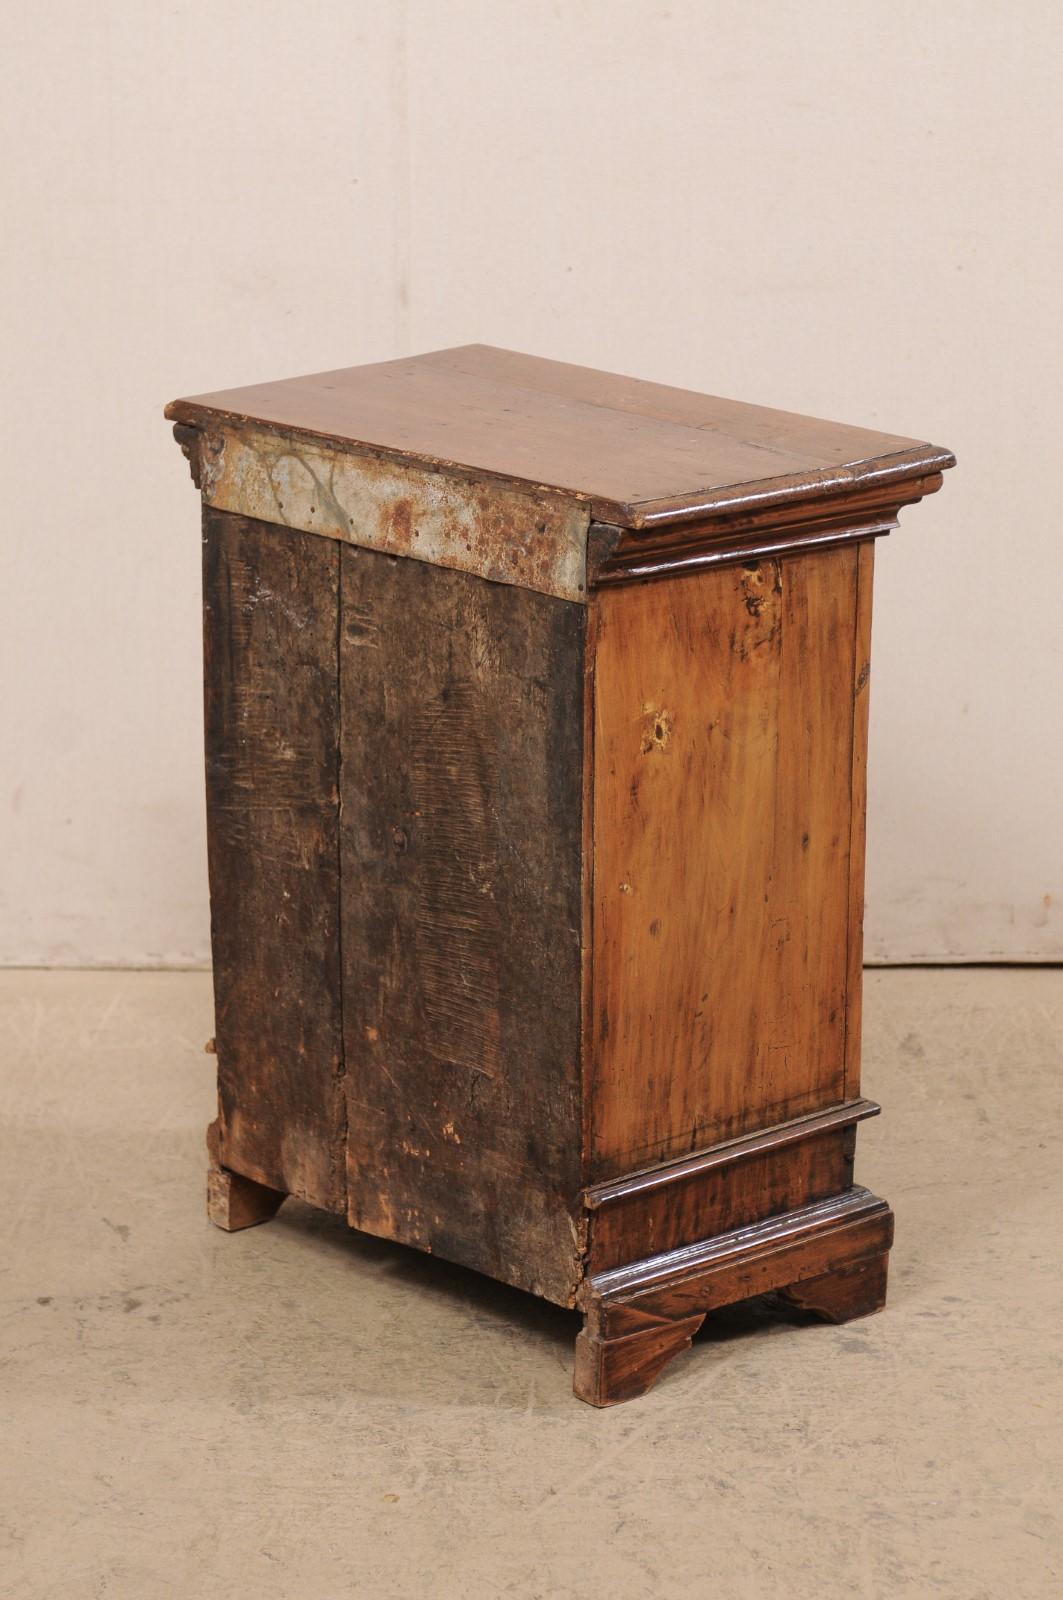 18th Century Italian Small-Sized Cabinet Adorn with Brass Medallion Accents 3